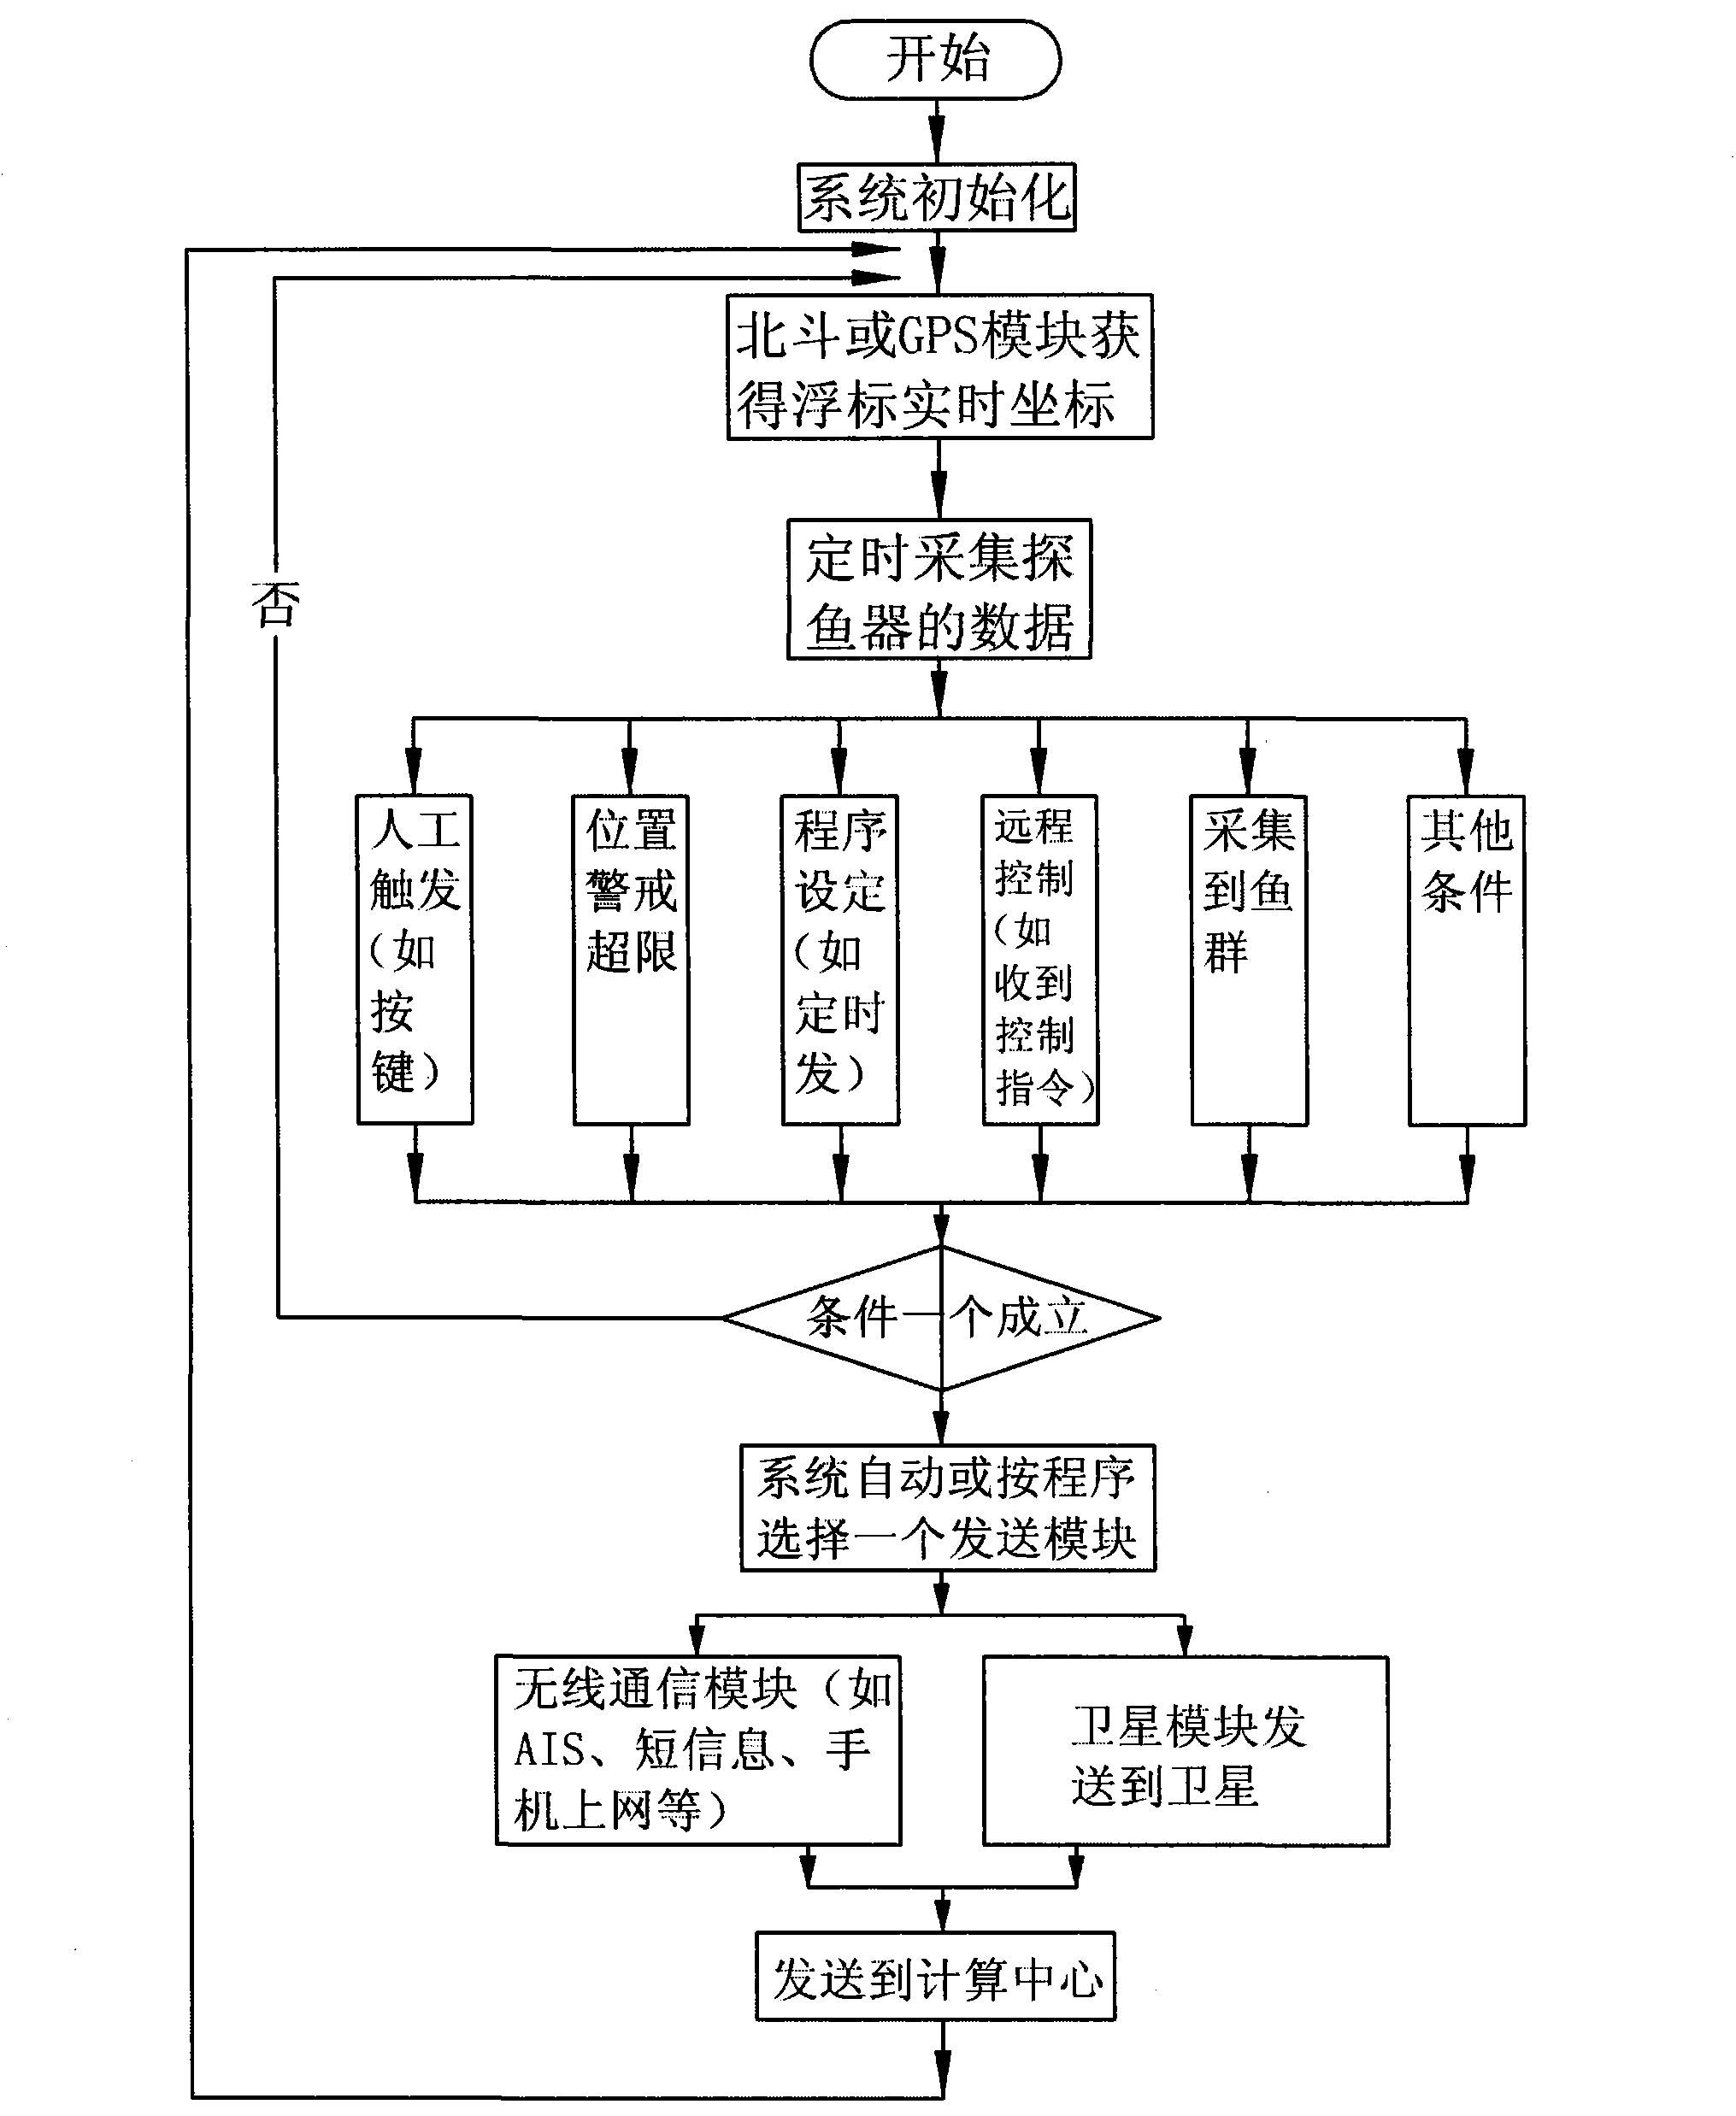 Fish stock remote detecting method and system and marketing method for information obtained through fish stock remote detection